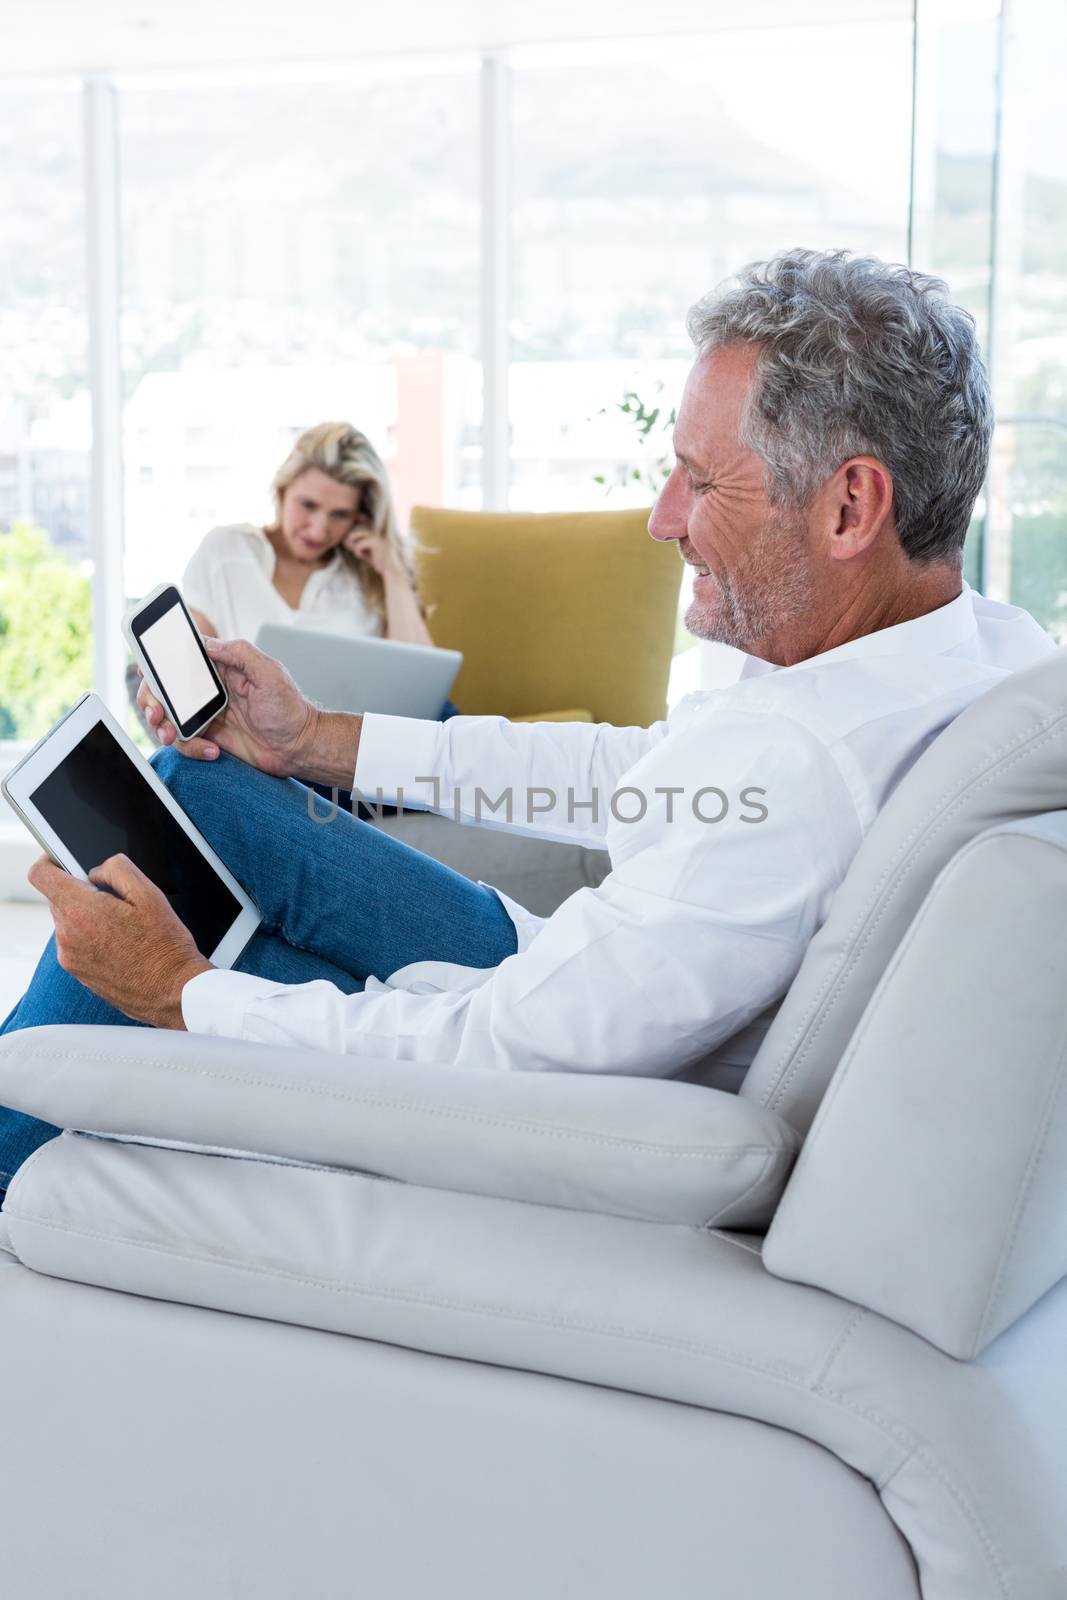 Smiling man using technology with woman in background